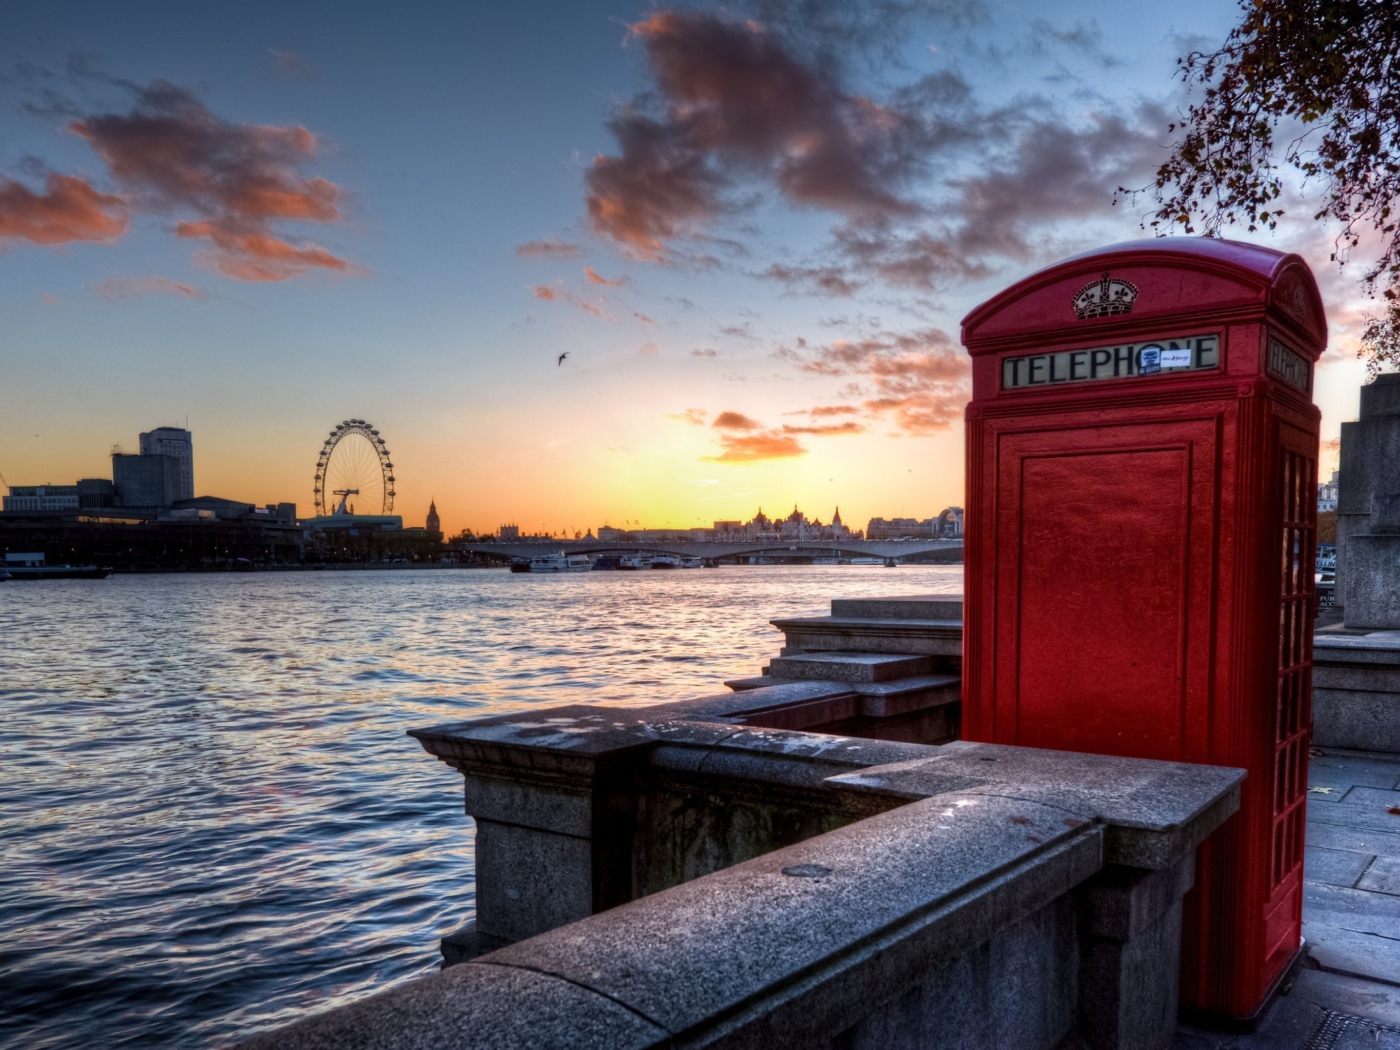 England Phone Booth in London wallpaper 1400x1050